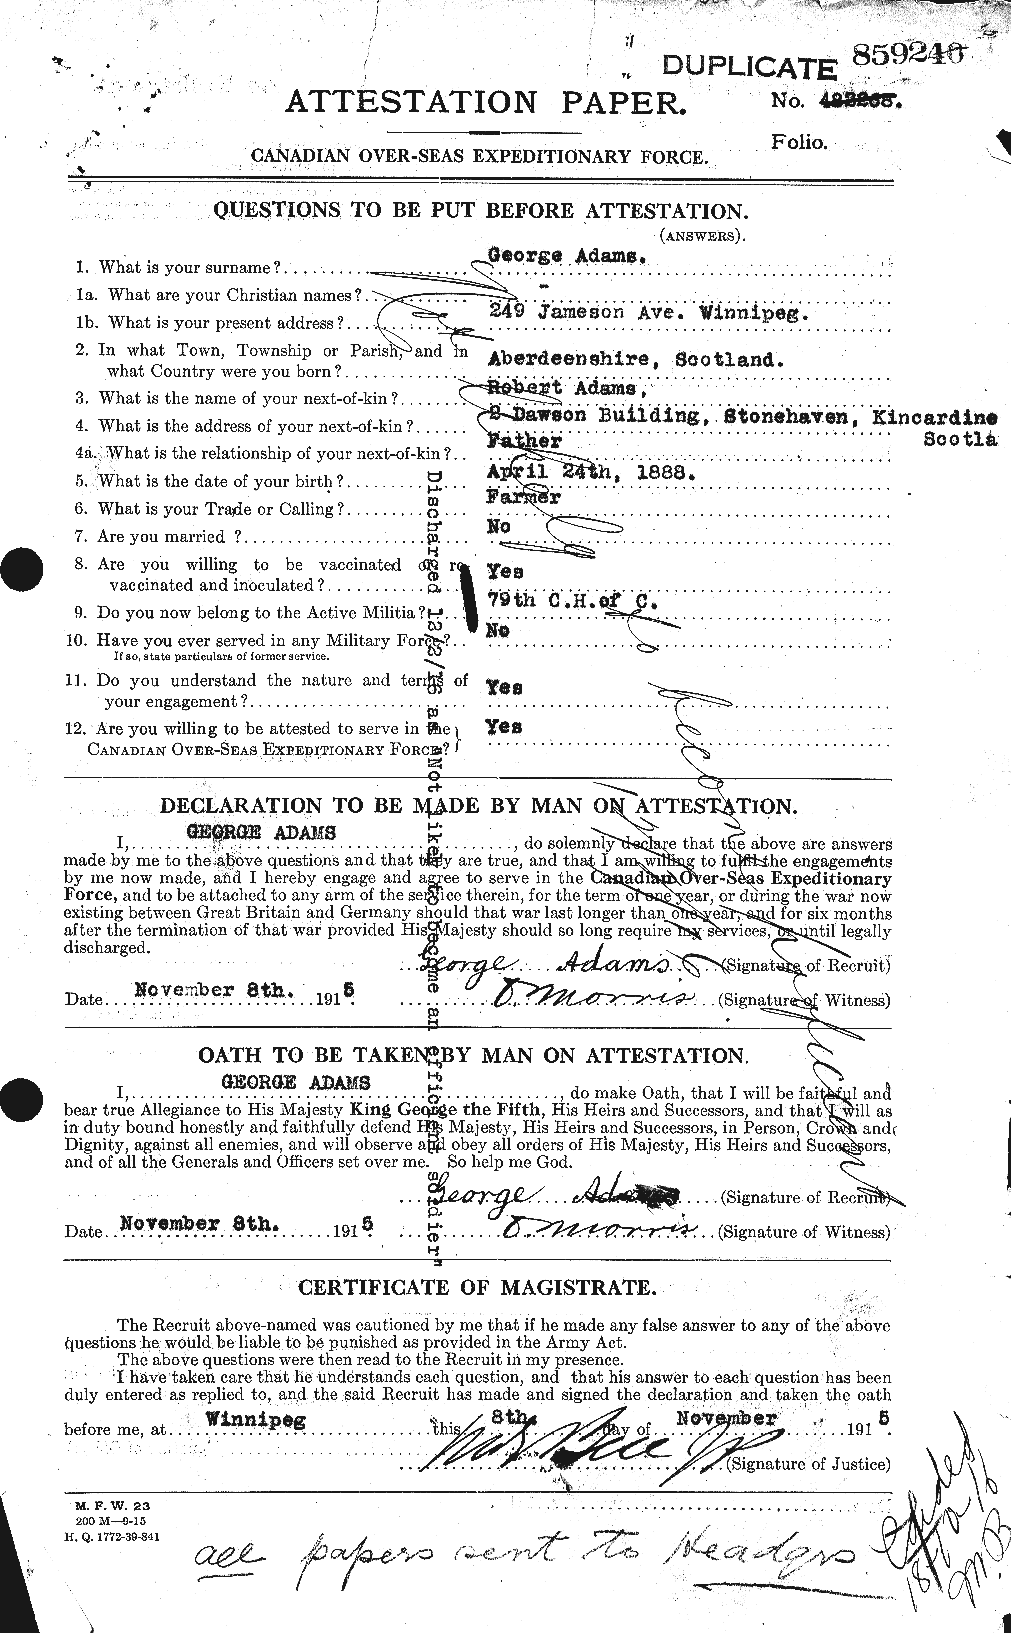 Personnel Records of the First World War - CEF 202529a